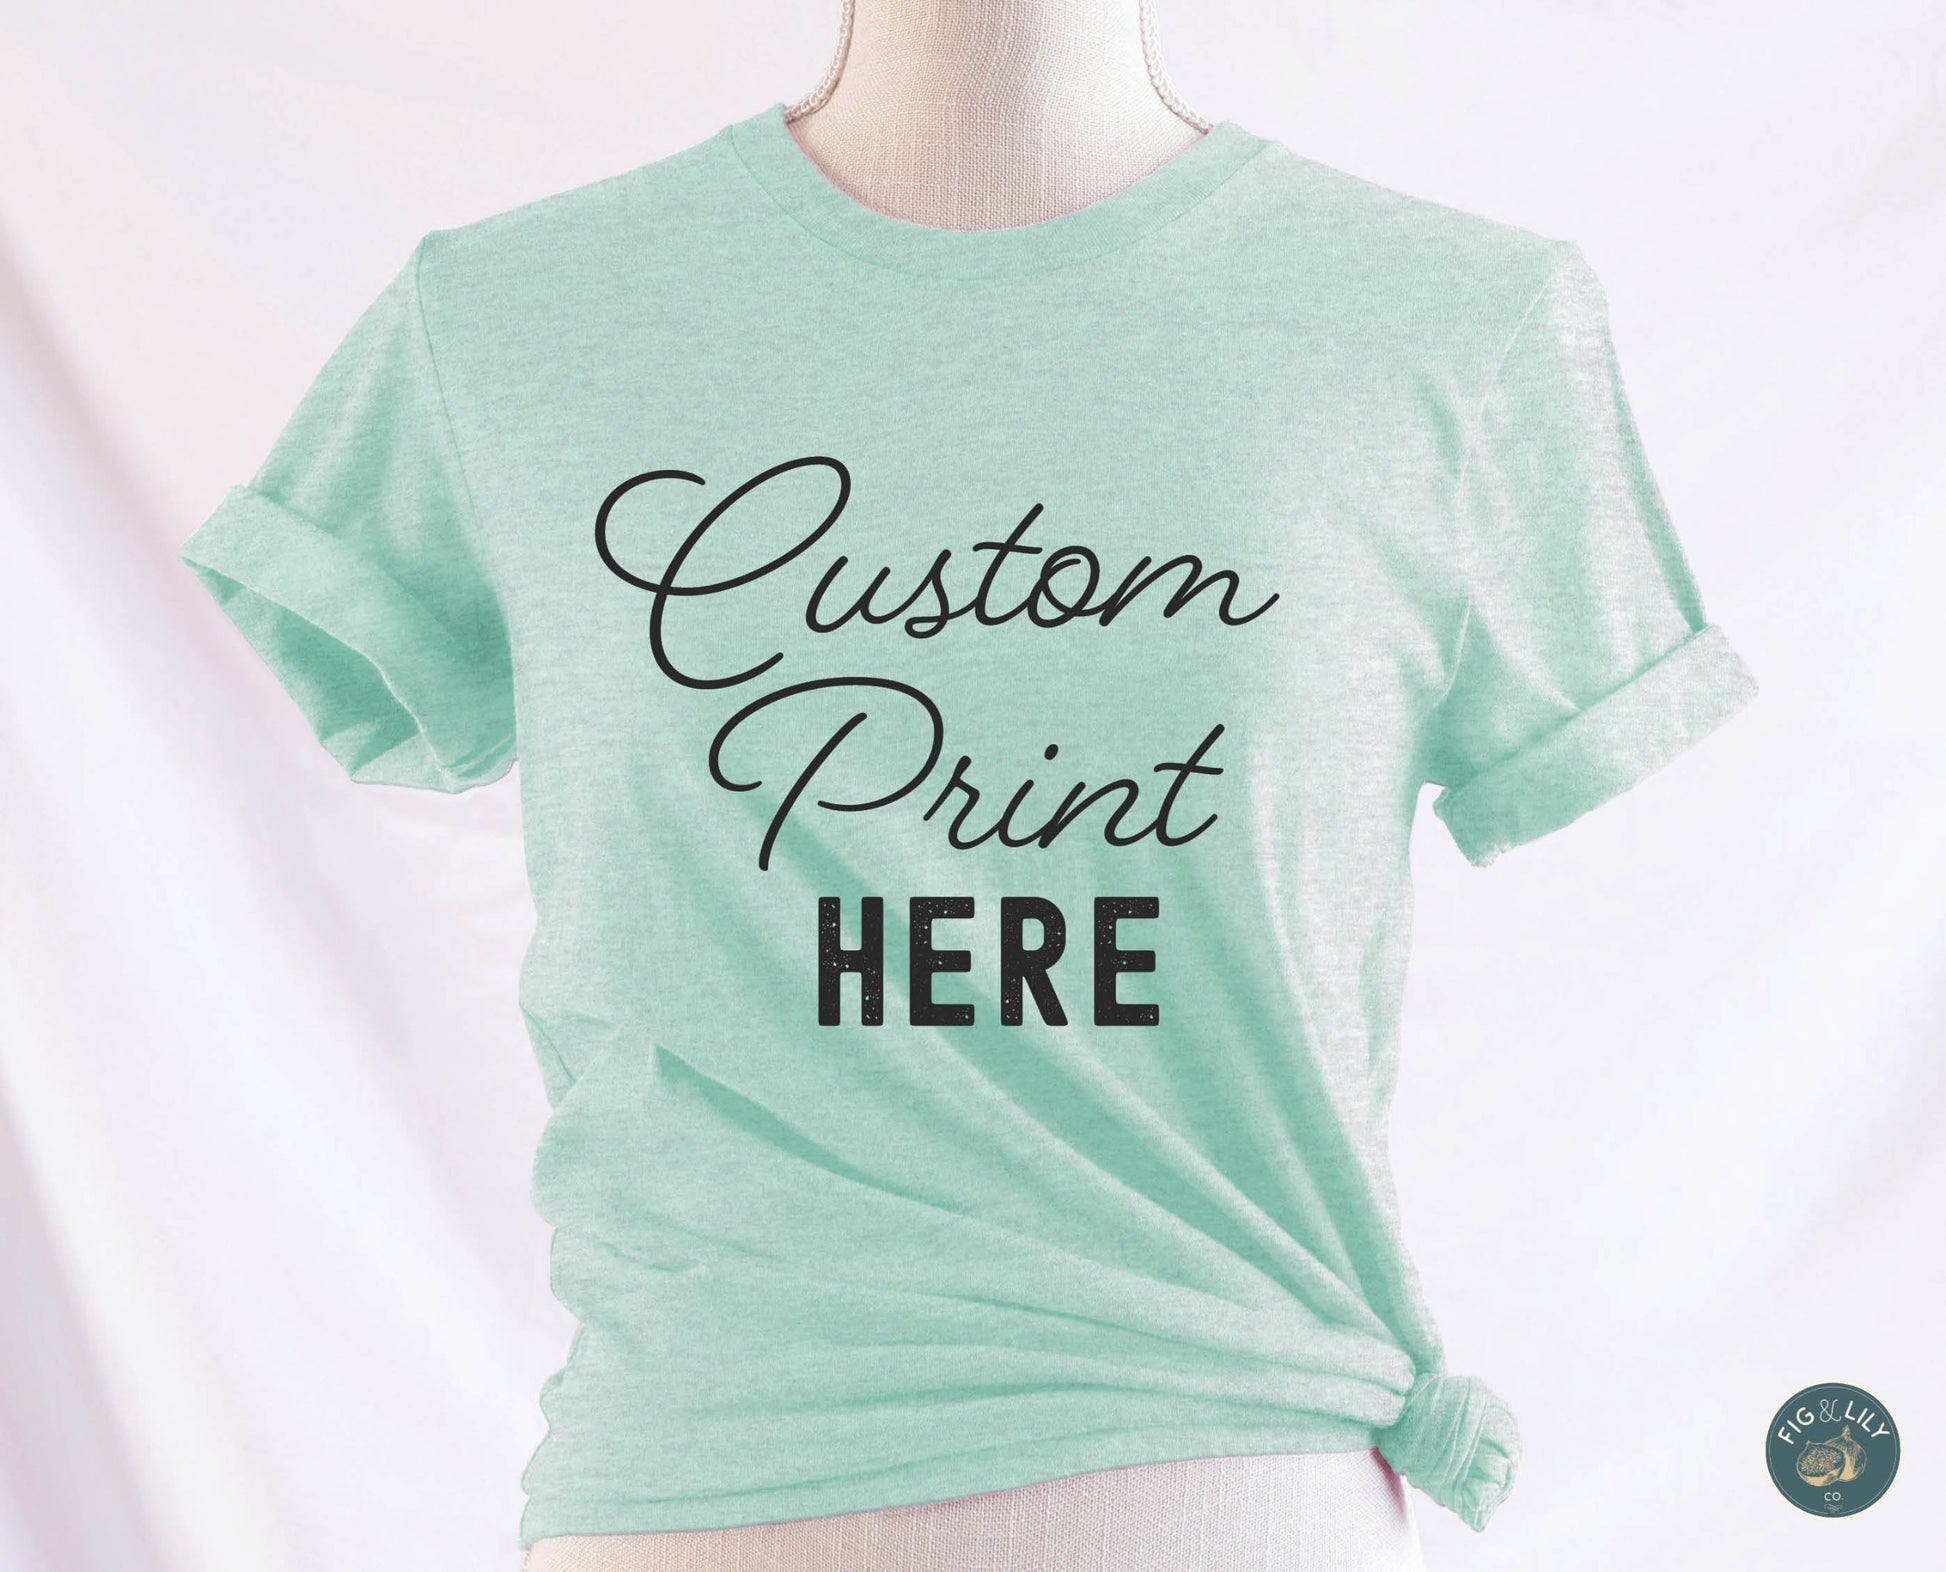 Fig & Lily Co. custom soft heather prism mint green unisex t-shirt with your personalized design printed, custom graphic design tees for men and women